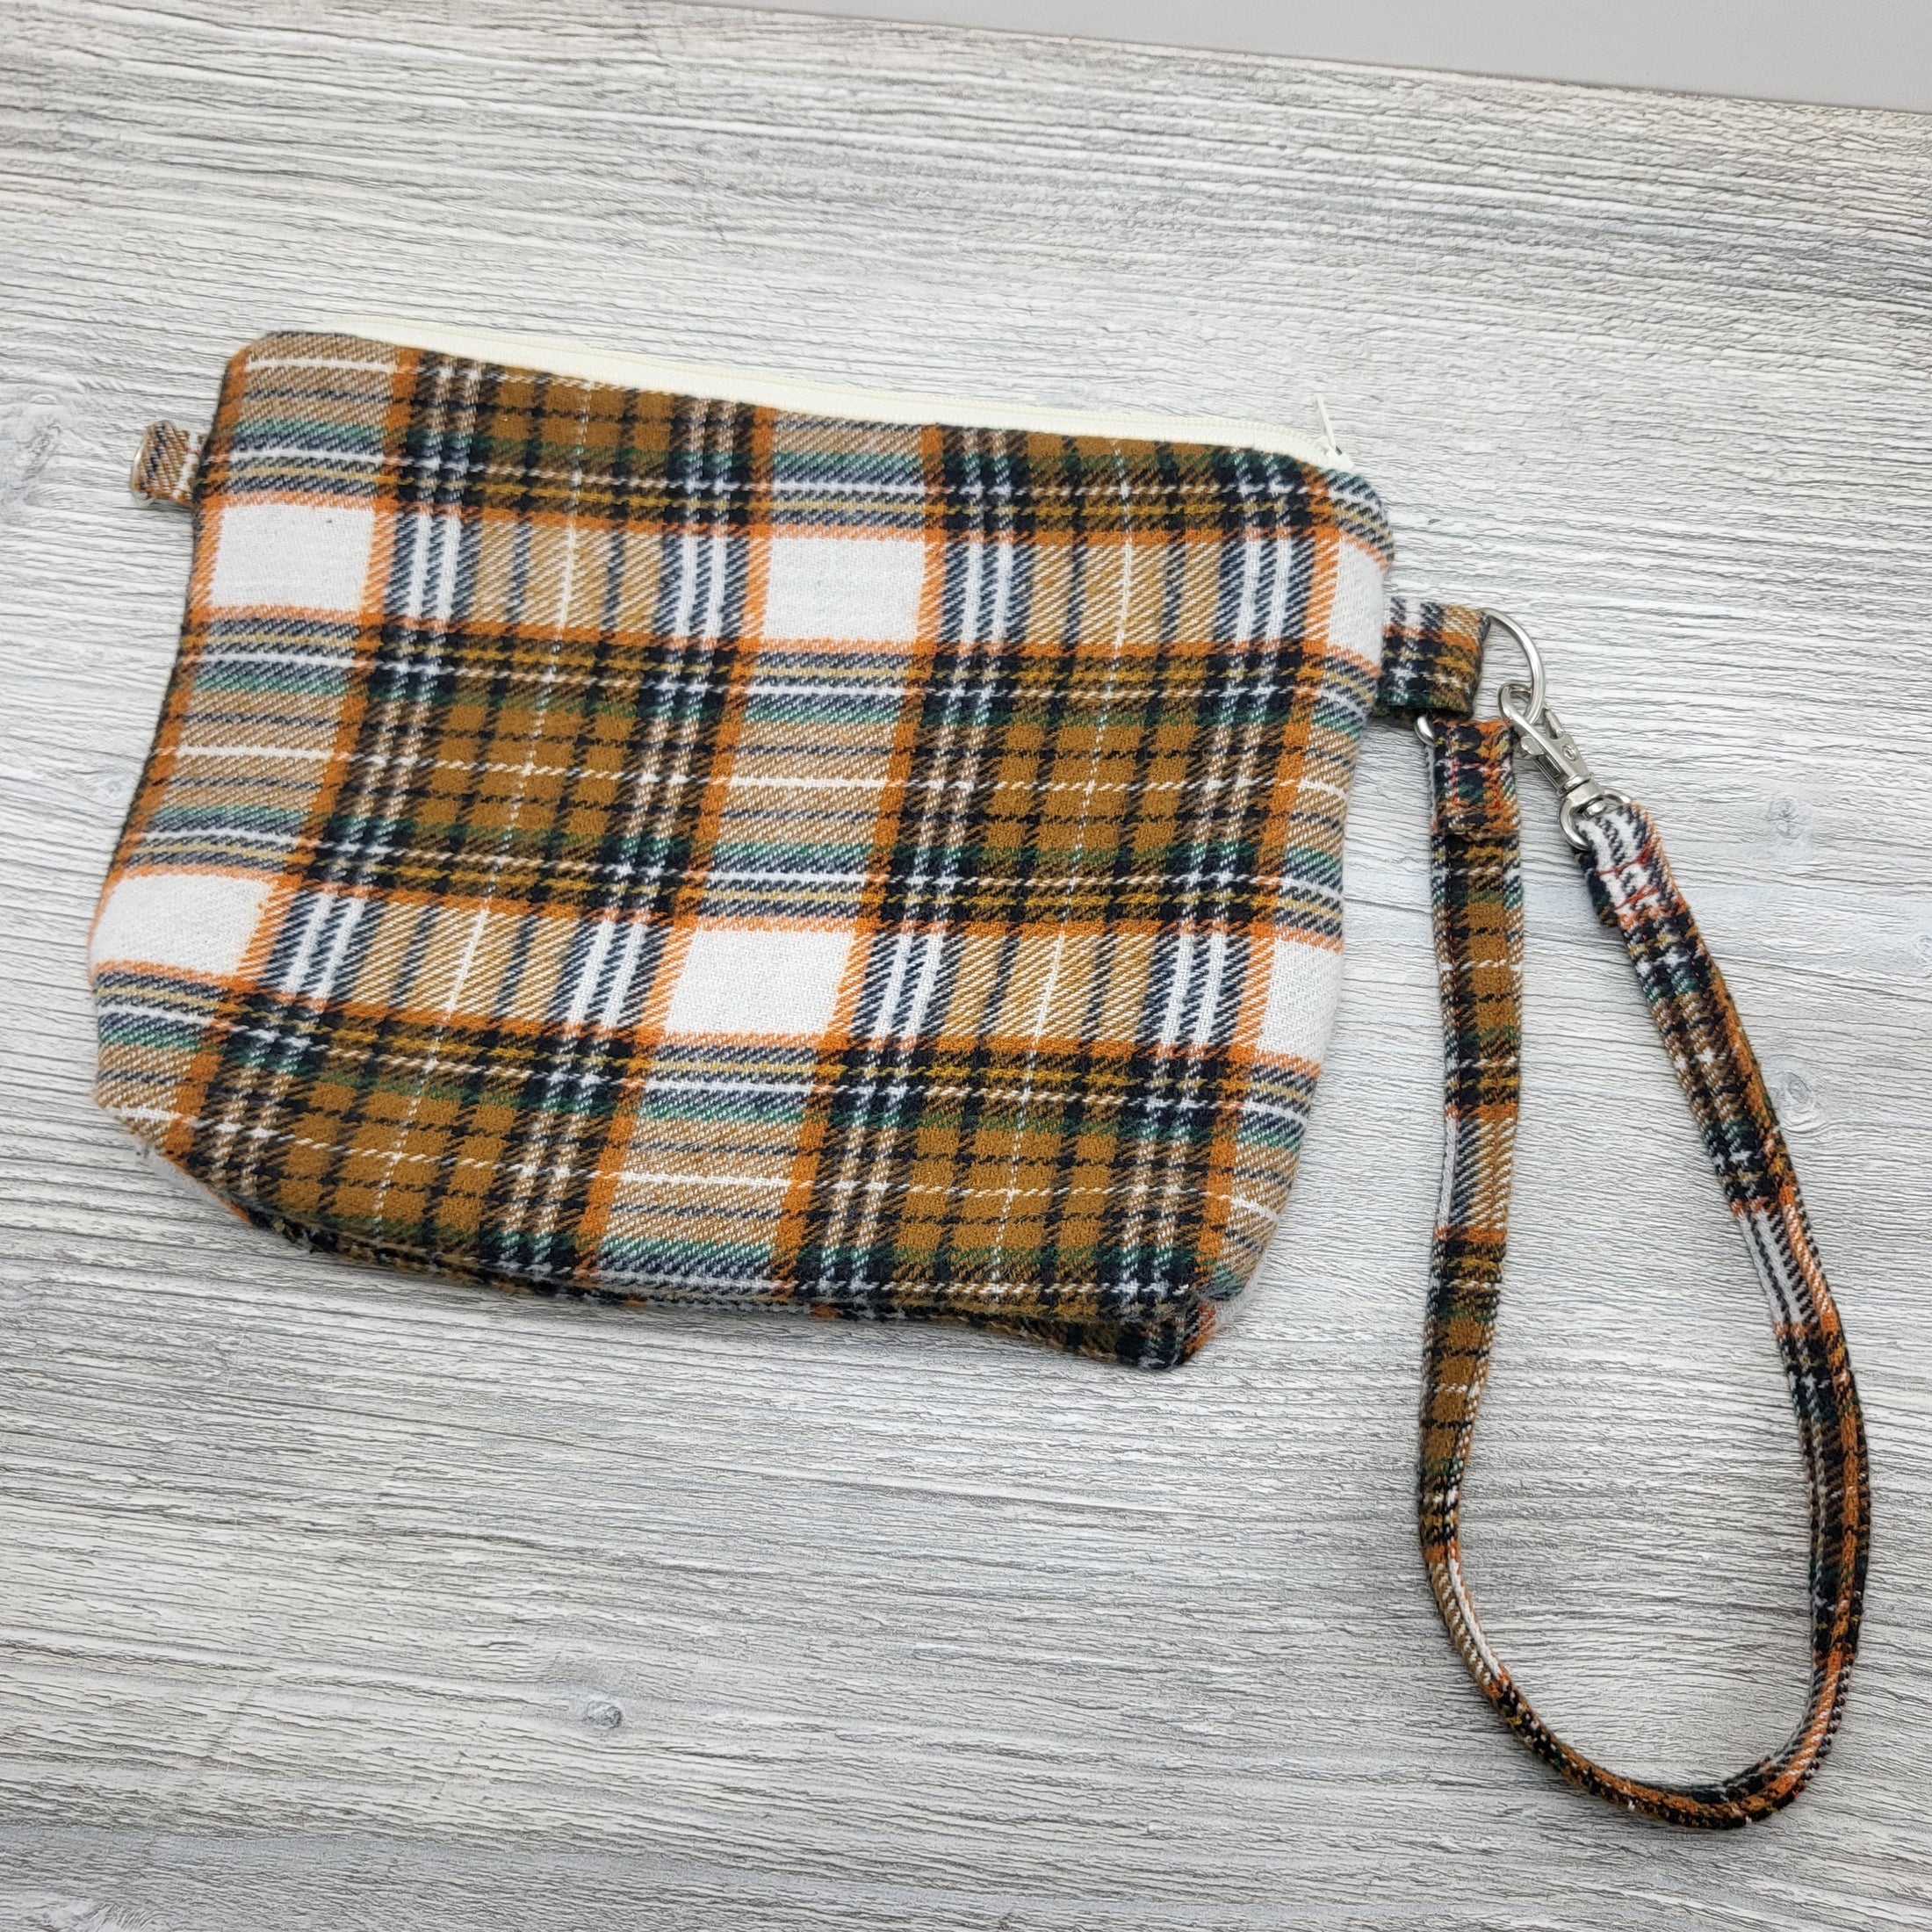 Orange and brown flannel purse for Autumn.